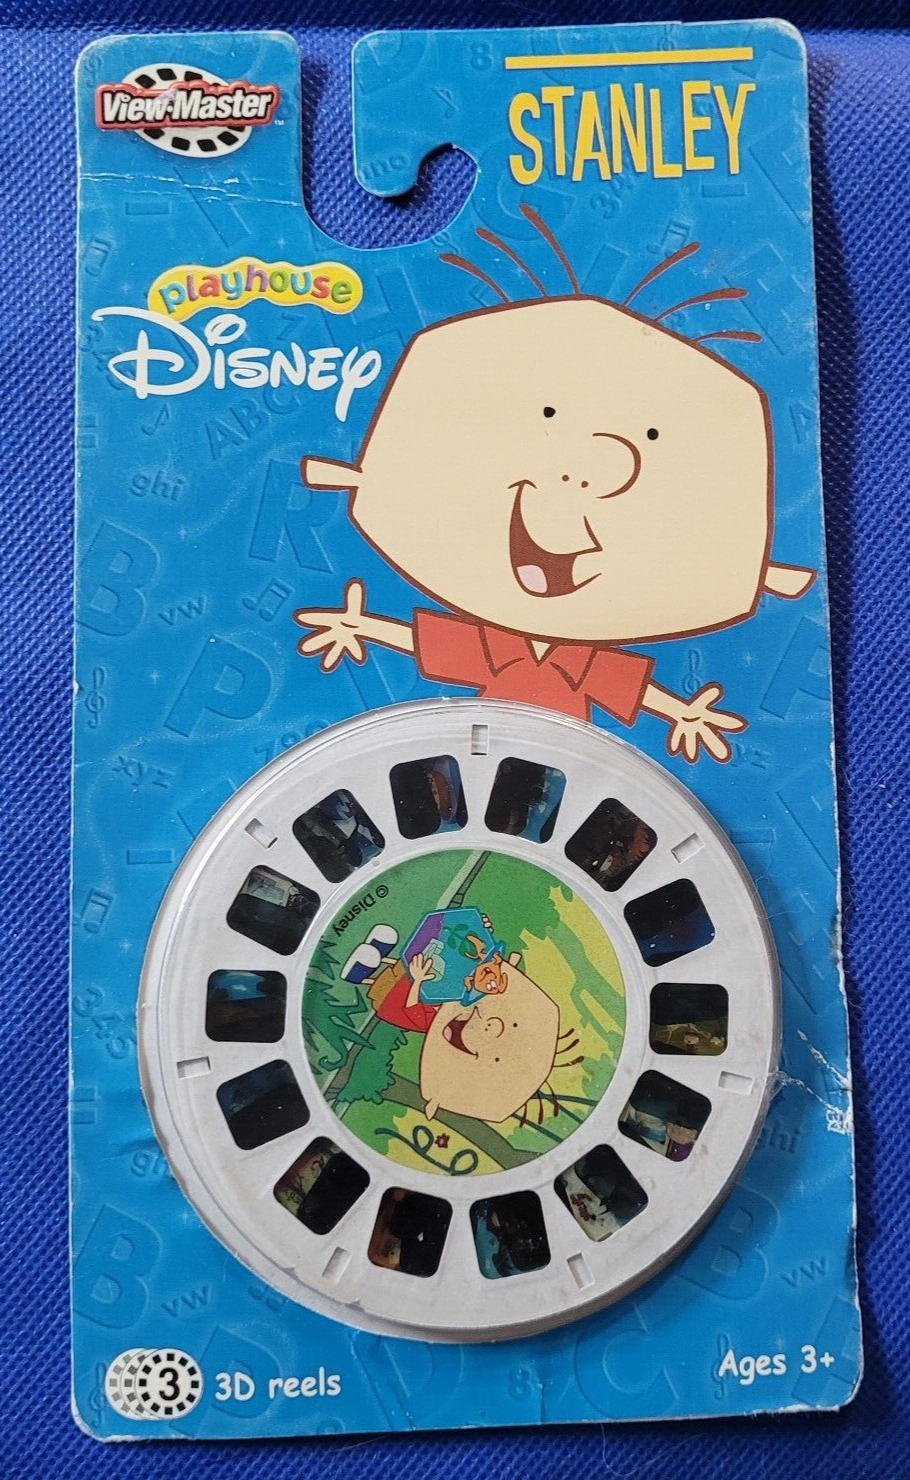 Rare SEALED Playhouse Disney Disney's Stanley TV Show view-master 3 Reels Pack